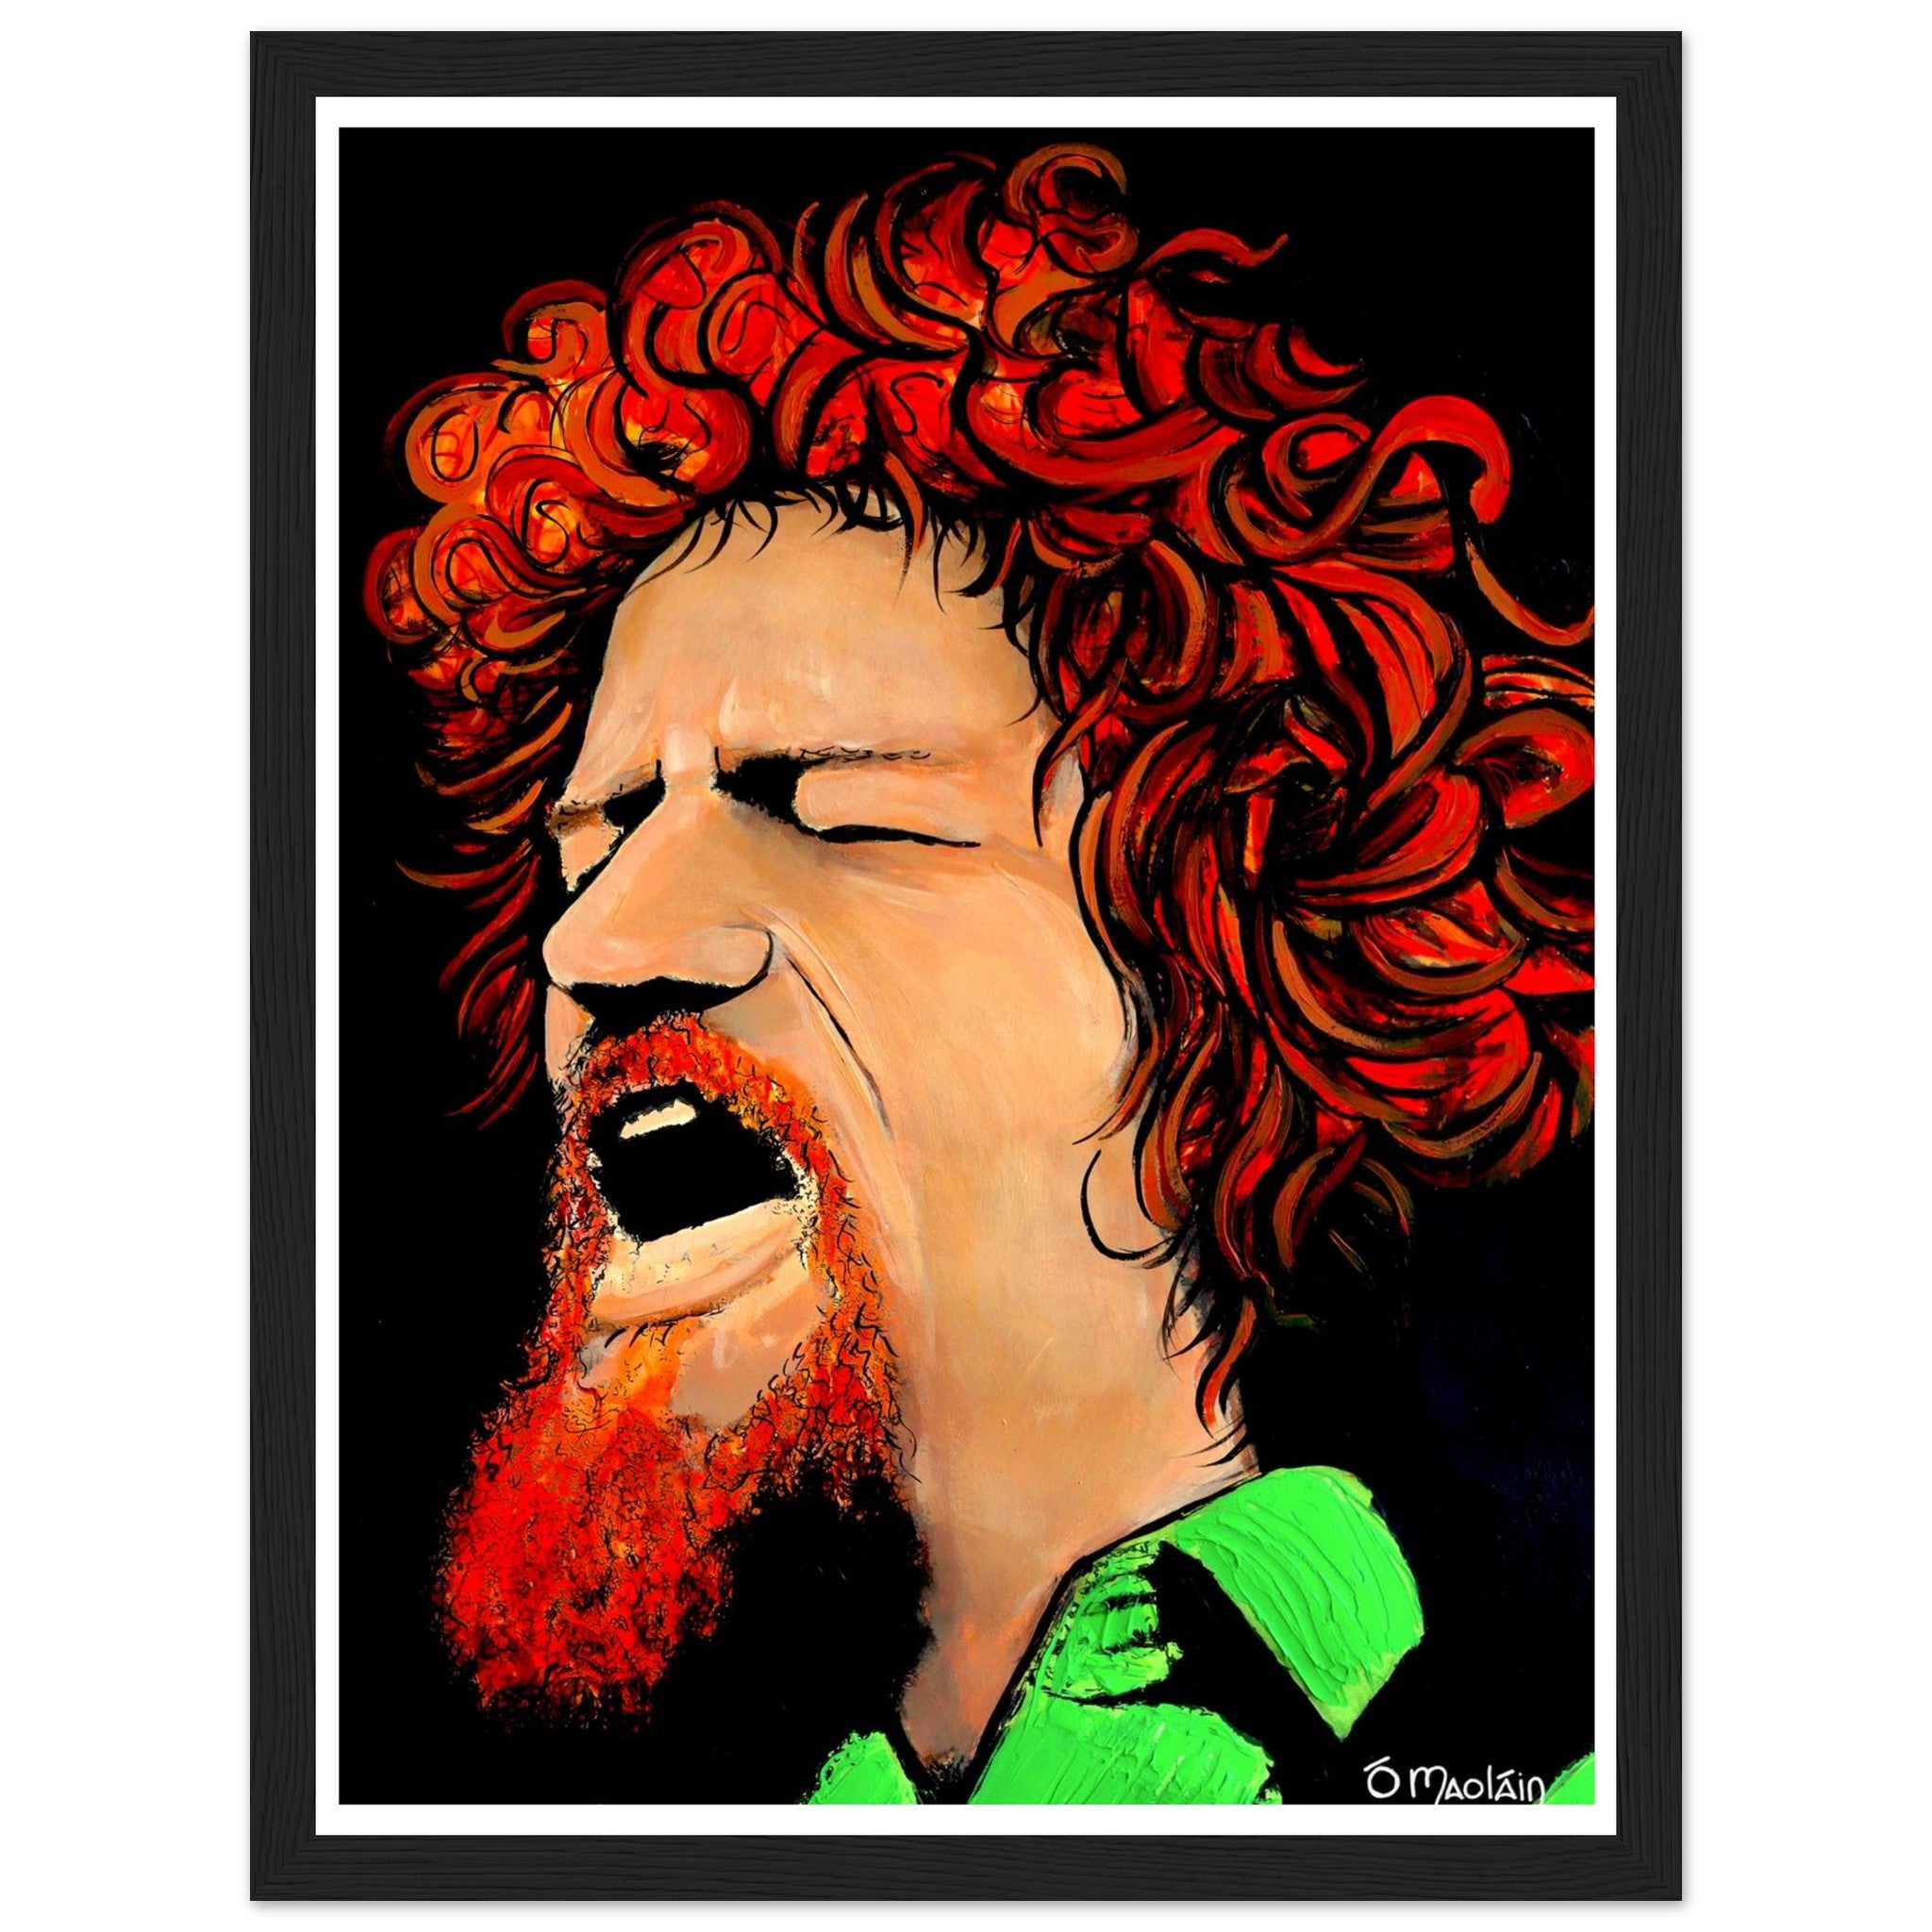 Working Class Hero is an open edition giclee print by Irish artist Ó Maoláin. This art print depicts Luke Kelly who was an Irish singer, folk musician and actor from Dublin, Ireland. Born into a working-class household in Dublin city, Kelly moved to England in his late teens and by his early 20s had become involved in a folk music revival. Buy Irish Art